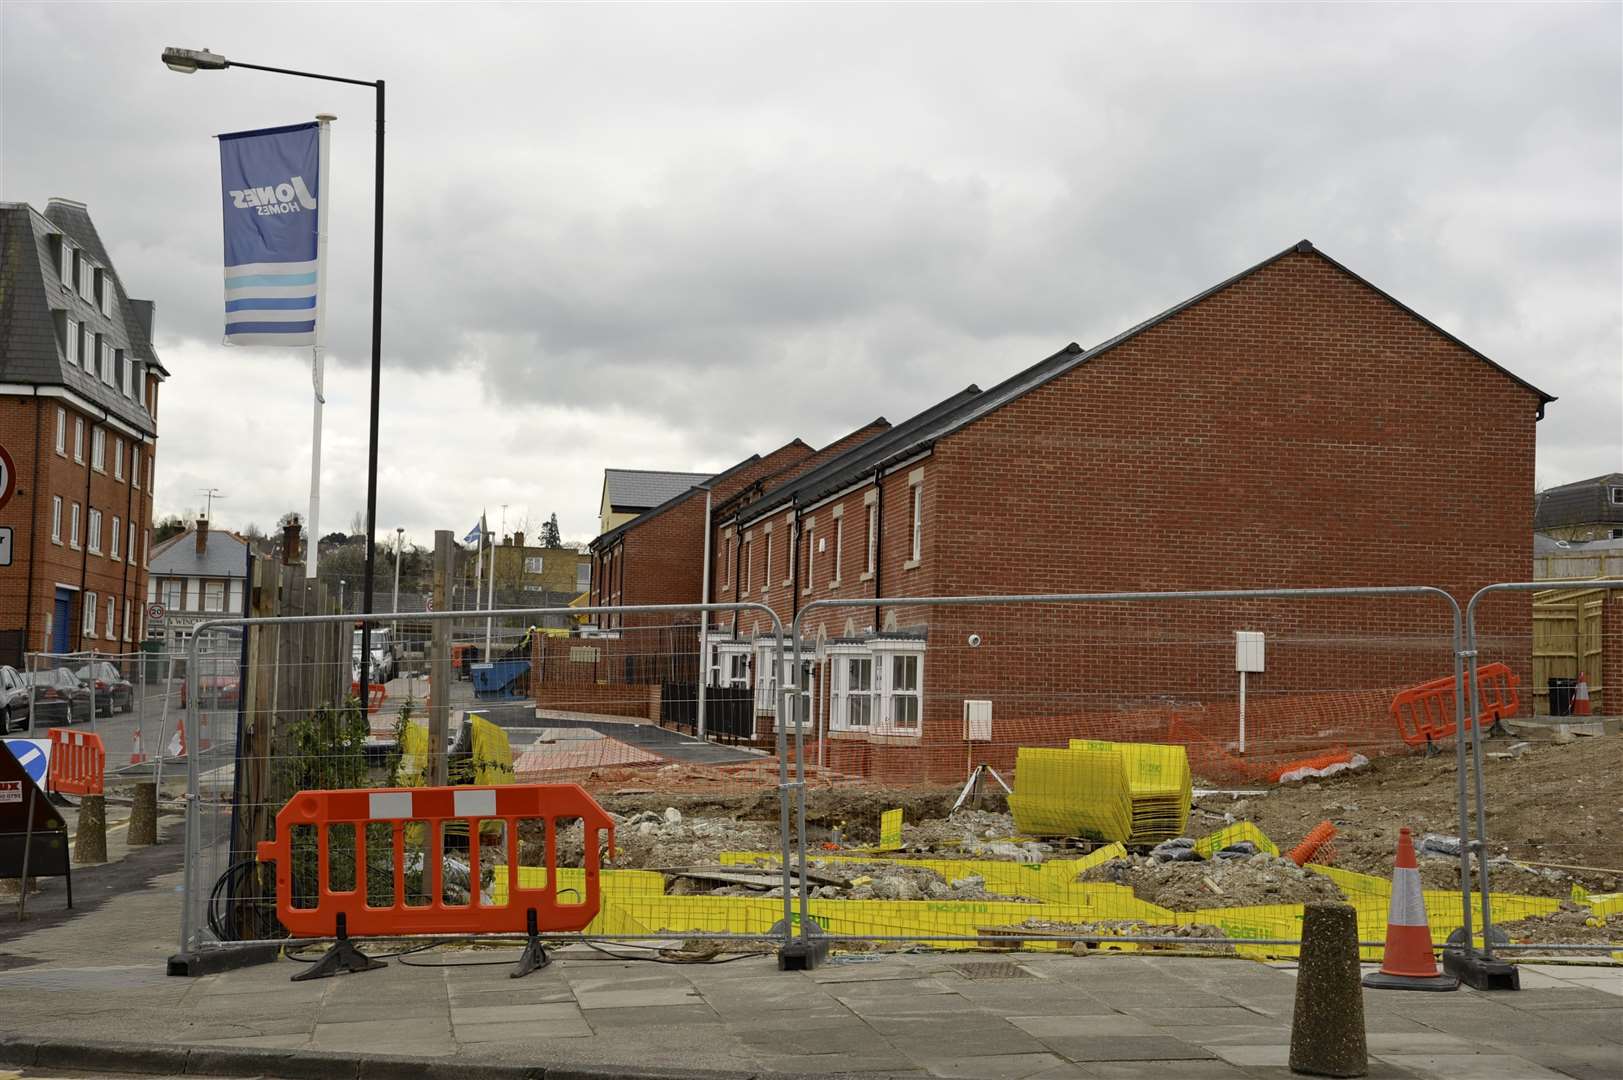 Construction work taking place at the site of the former police station in 2013